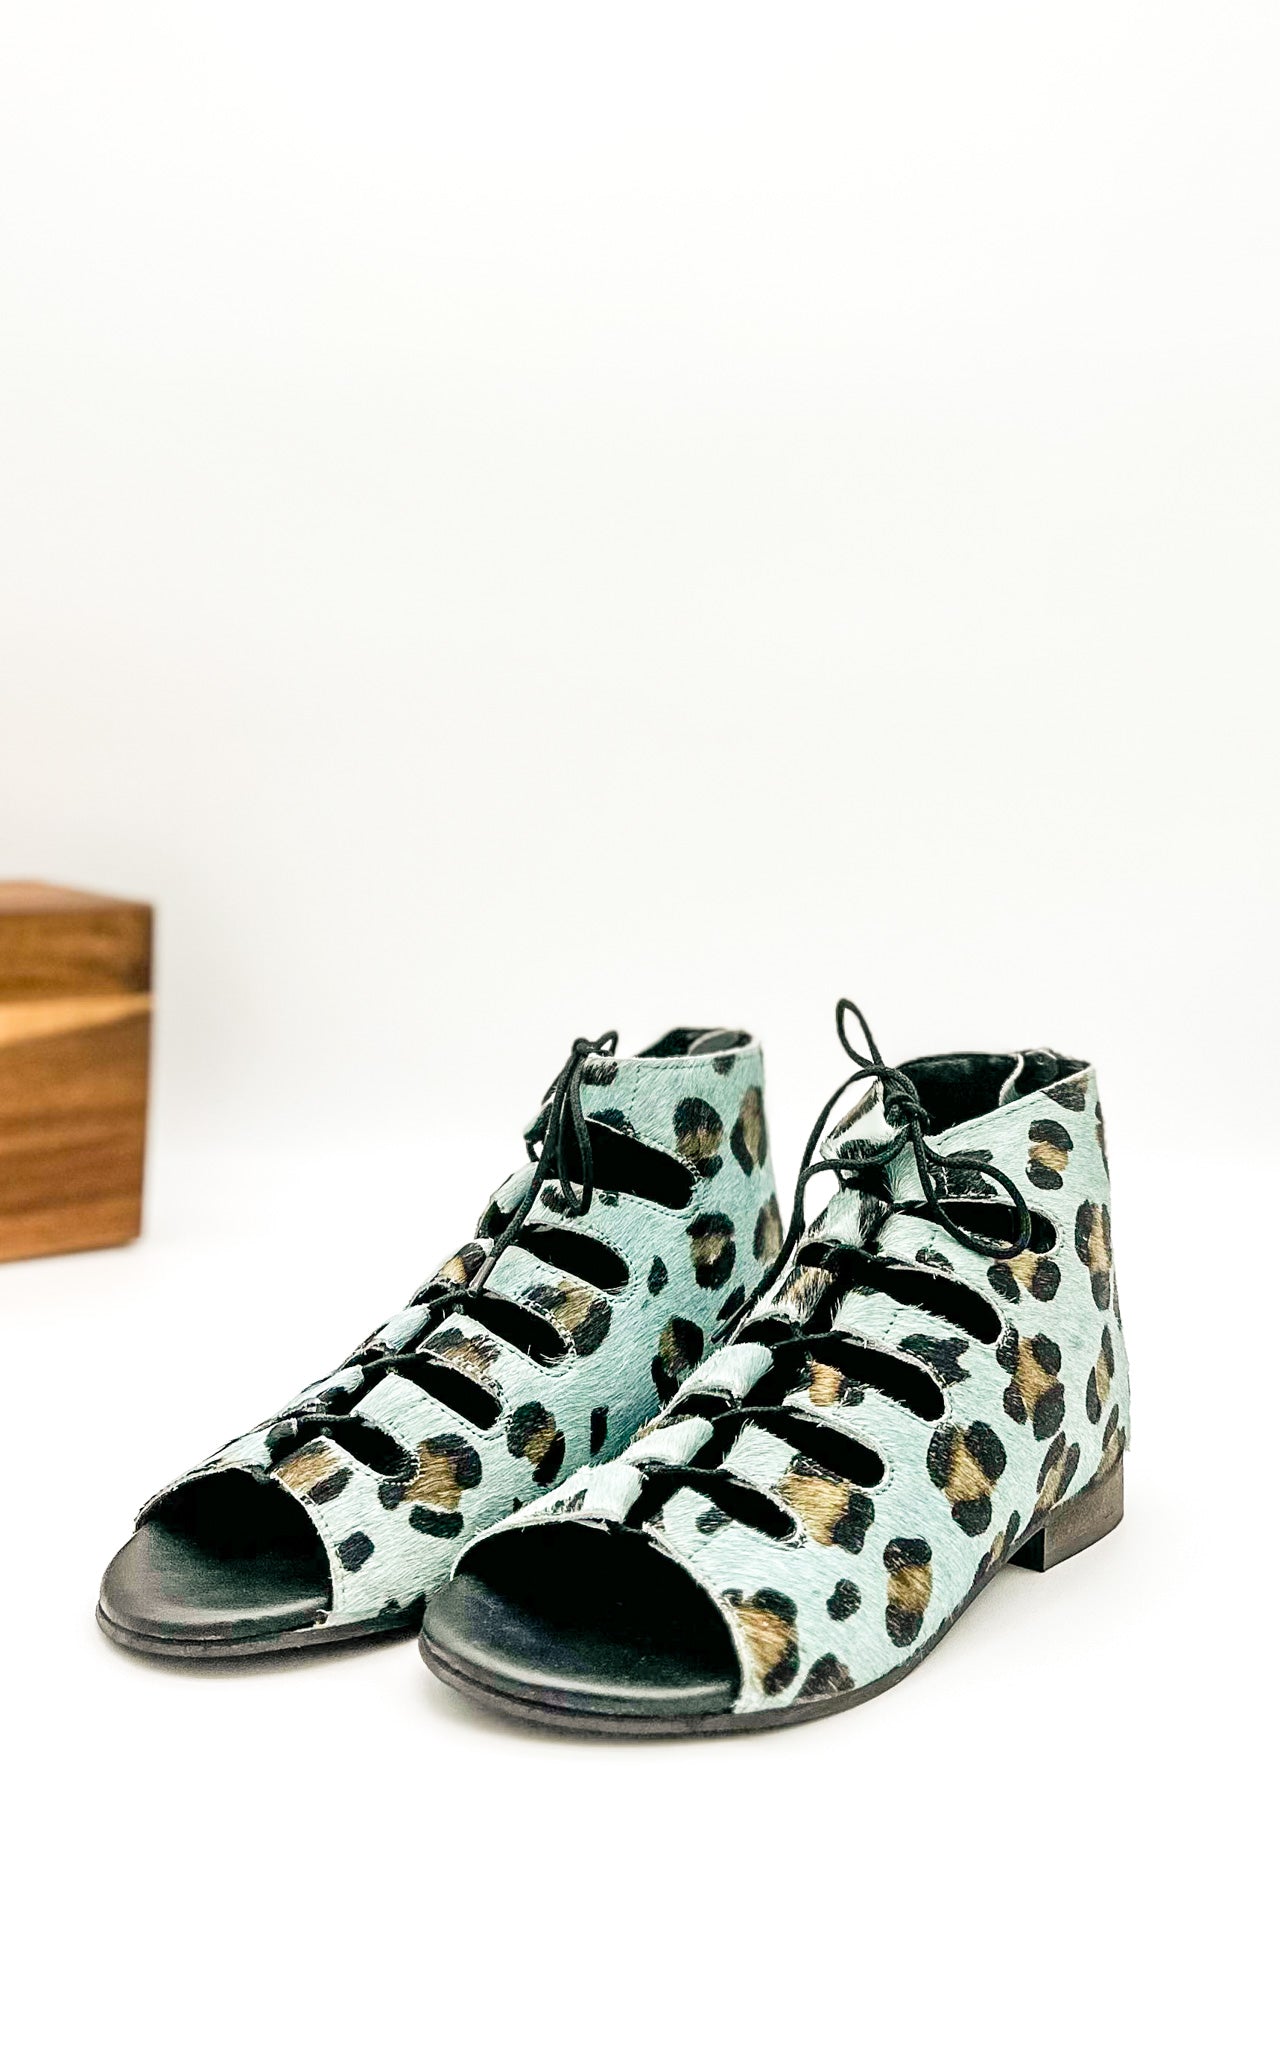 Naughty Monkey Nola Sandals in Teal